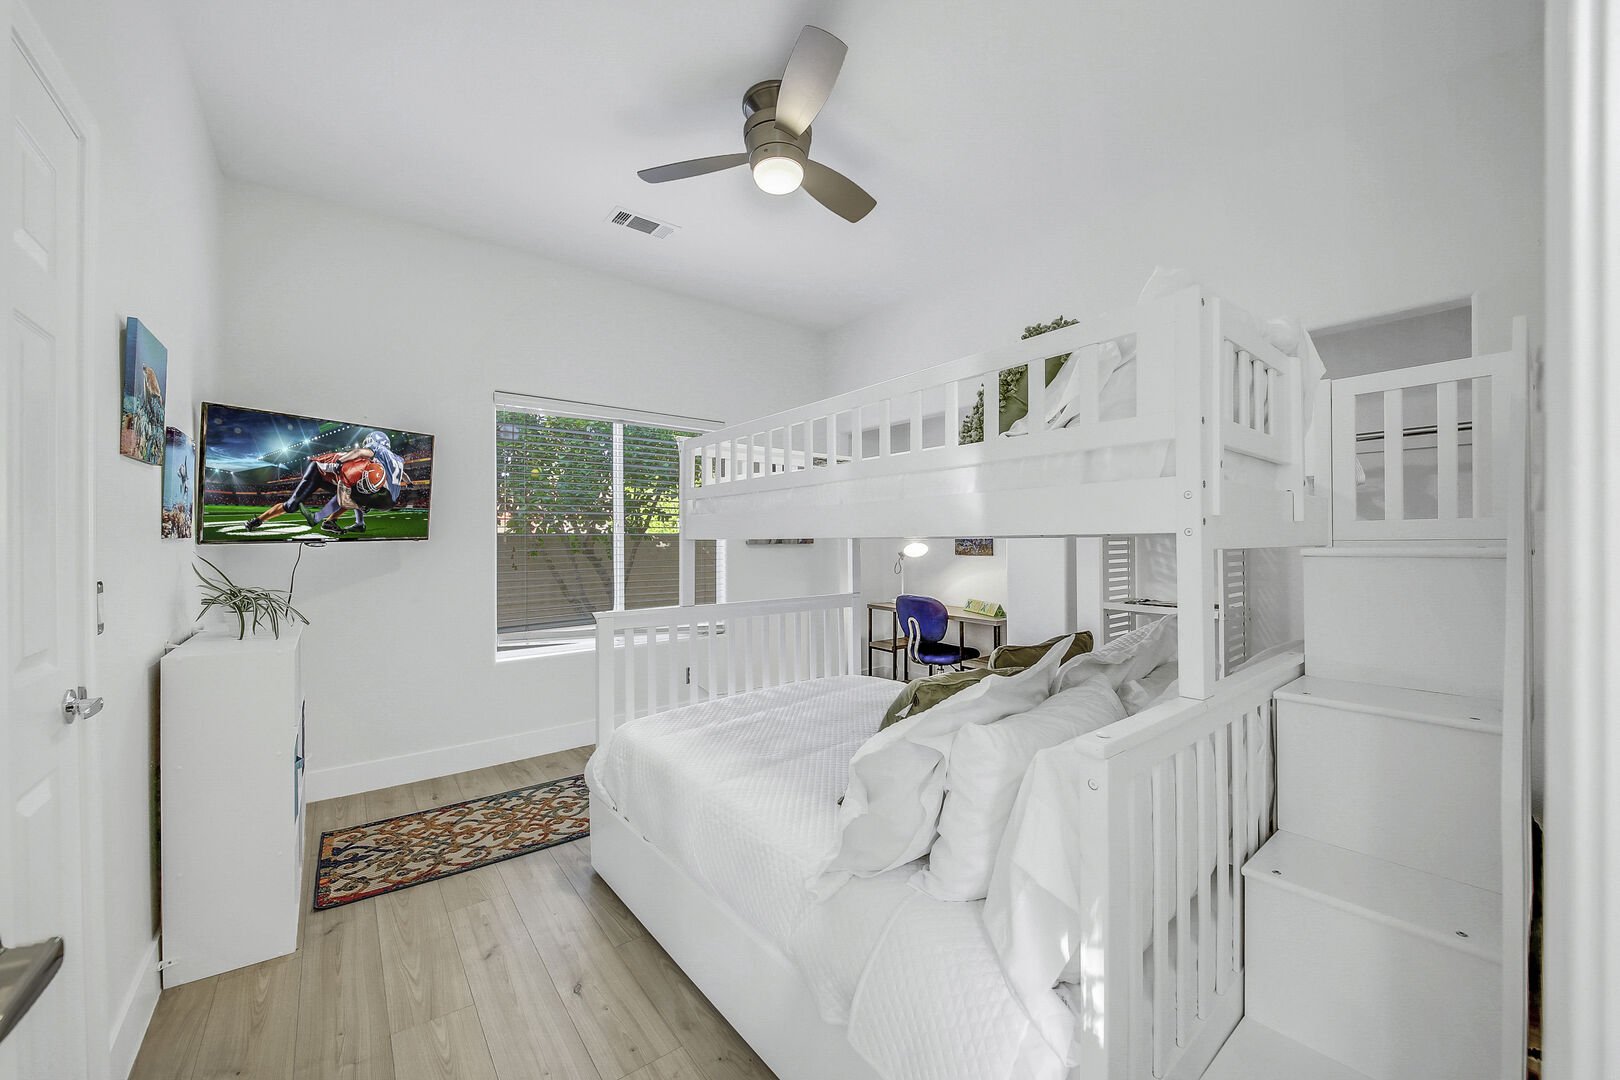 Bedroom 4 is located next to bedroom 3 and features a Twin Over Full with Twin Trundle Bunk Bed and a 32-inch HiSense with Roku Smart television.